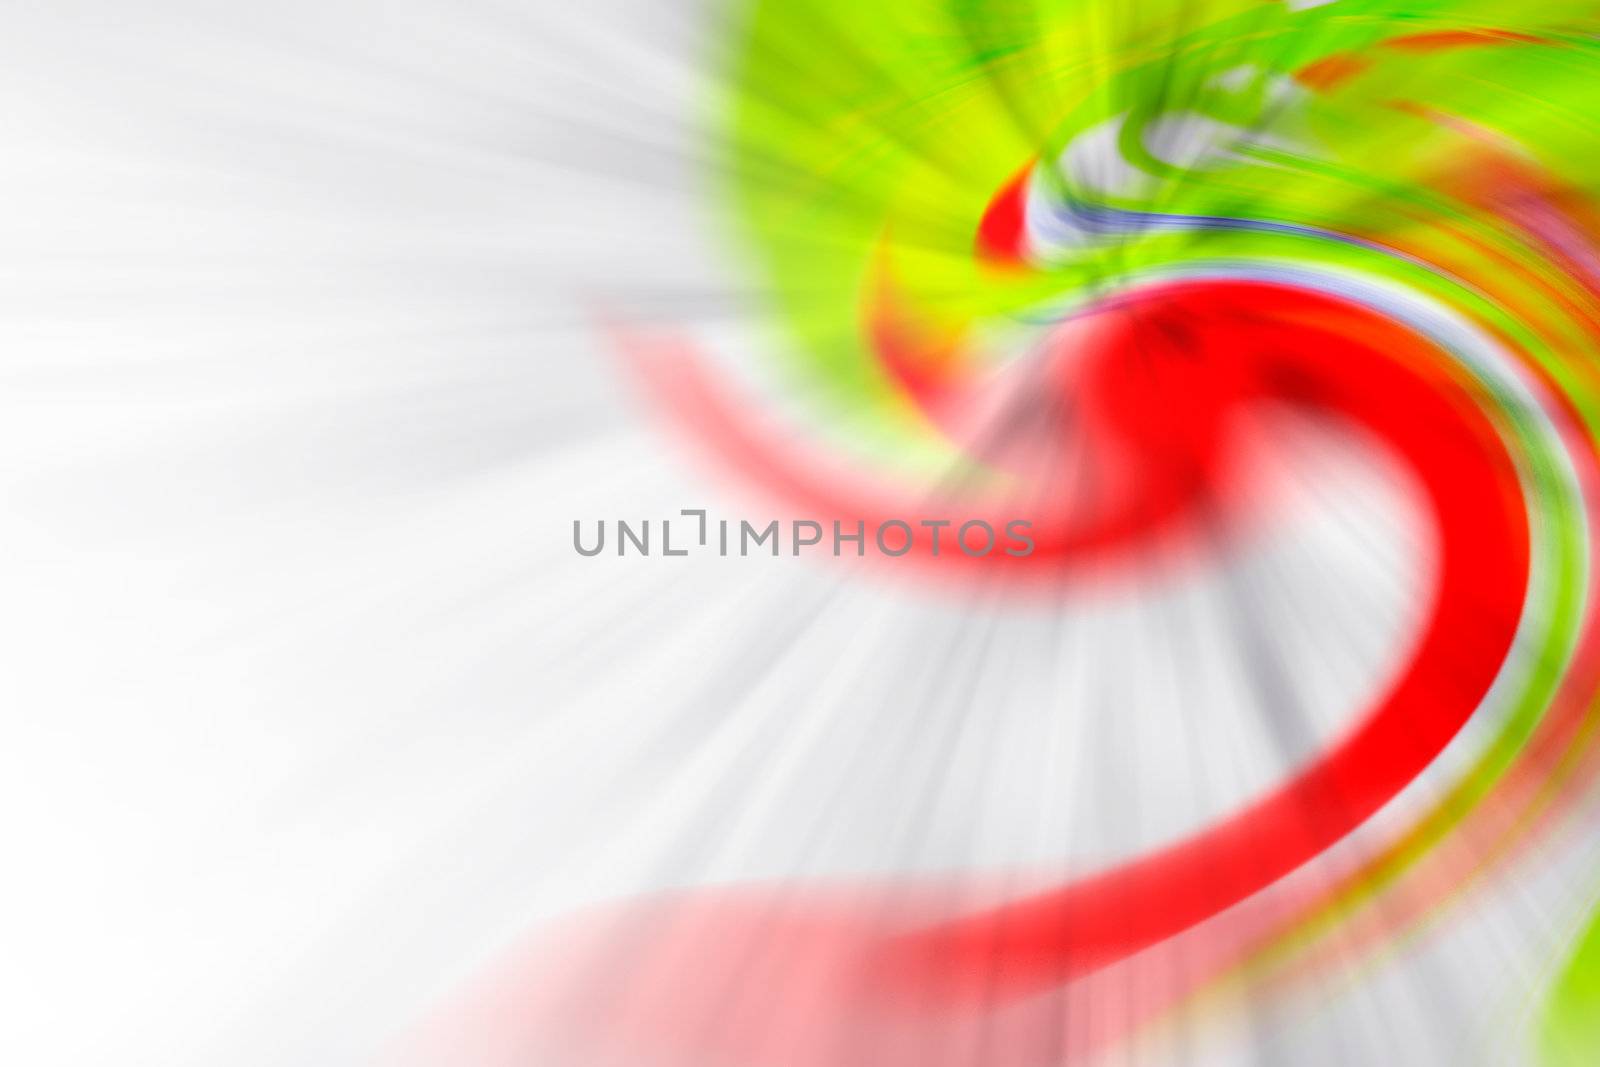 It is a beautiful abstract colorful background.